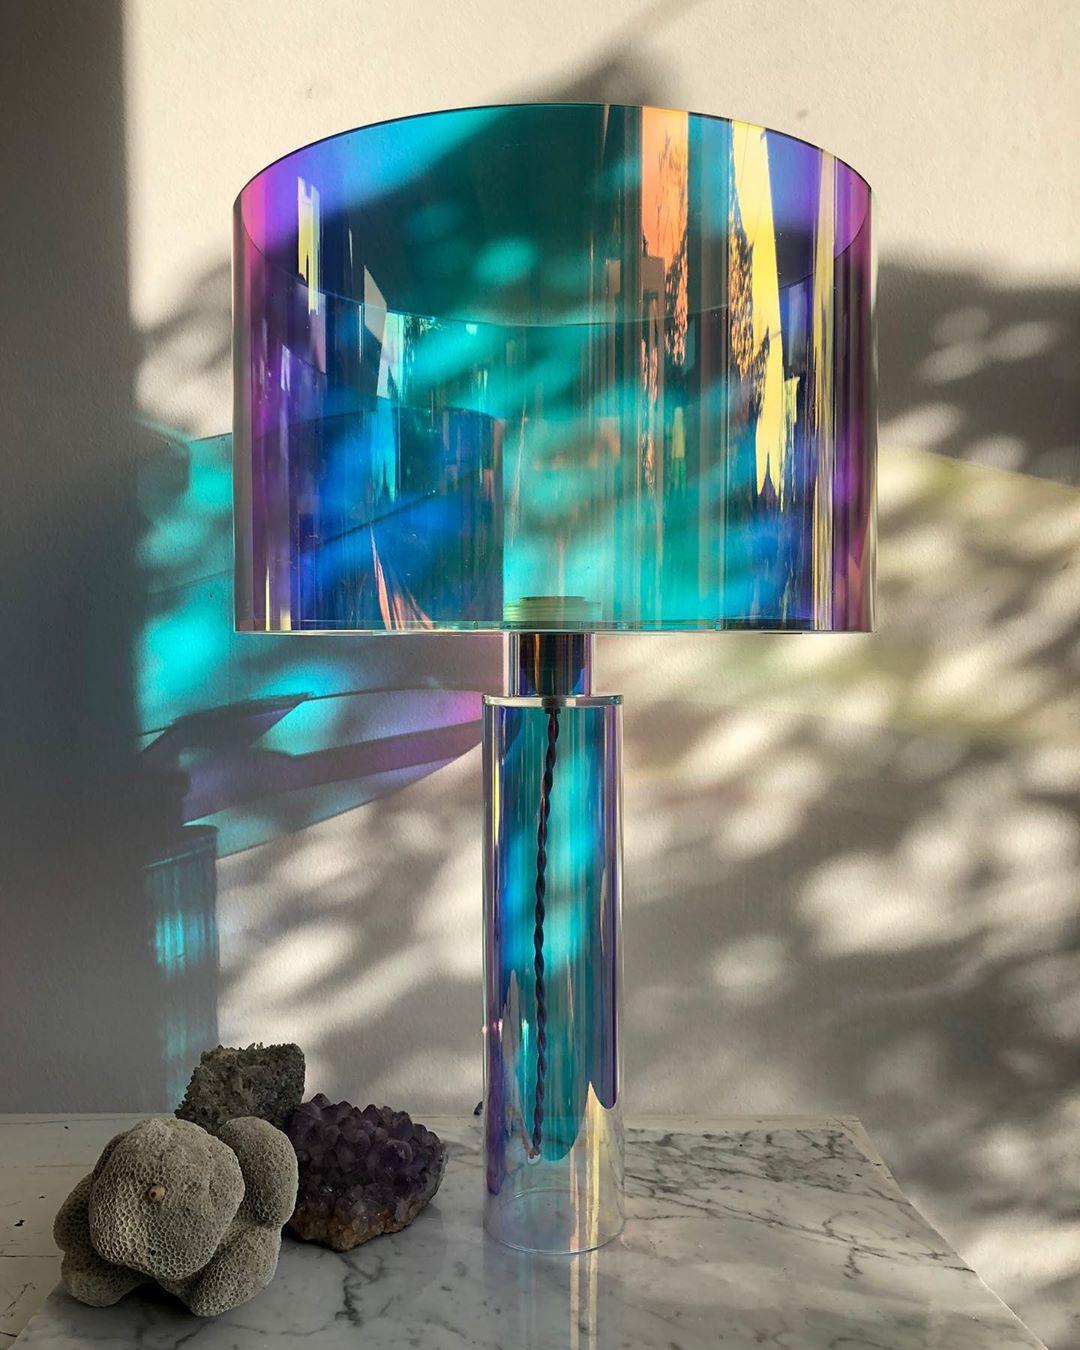 Kinetic colors table lamp by Brajak Vitberg
Materials: plexiglass + dichroic film
white or black cotton lampshade, cotton wiring
Dimensions: 55 x 35 x 35 cm

Bijelic and Brajak are two architects from Ljubljana, Slovenia.
They are striving to